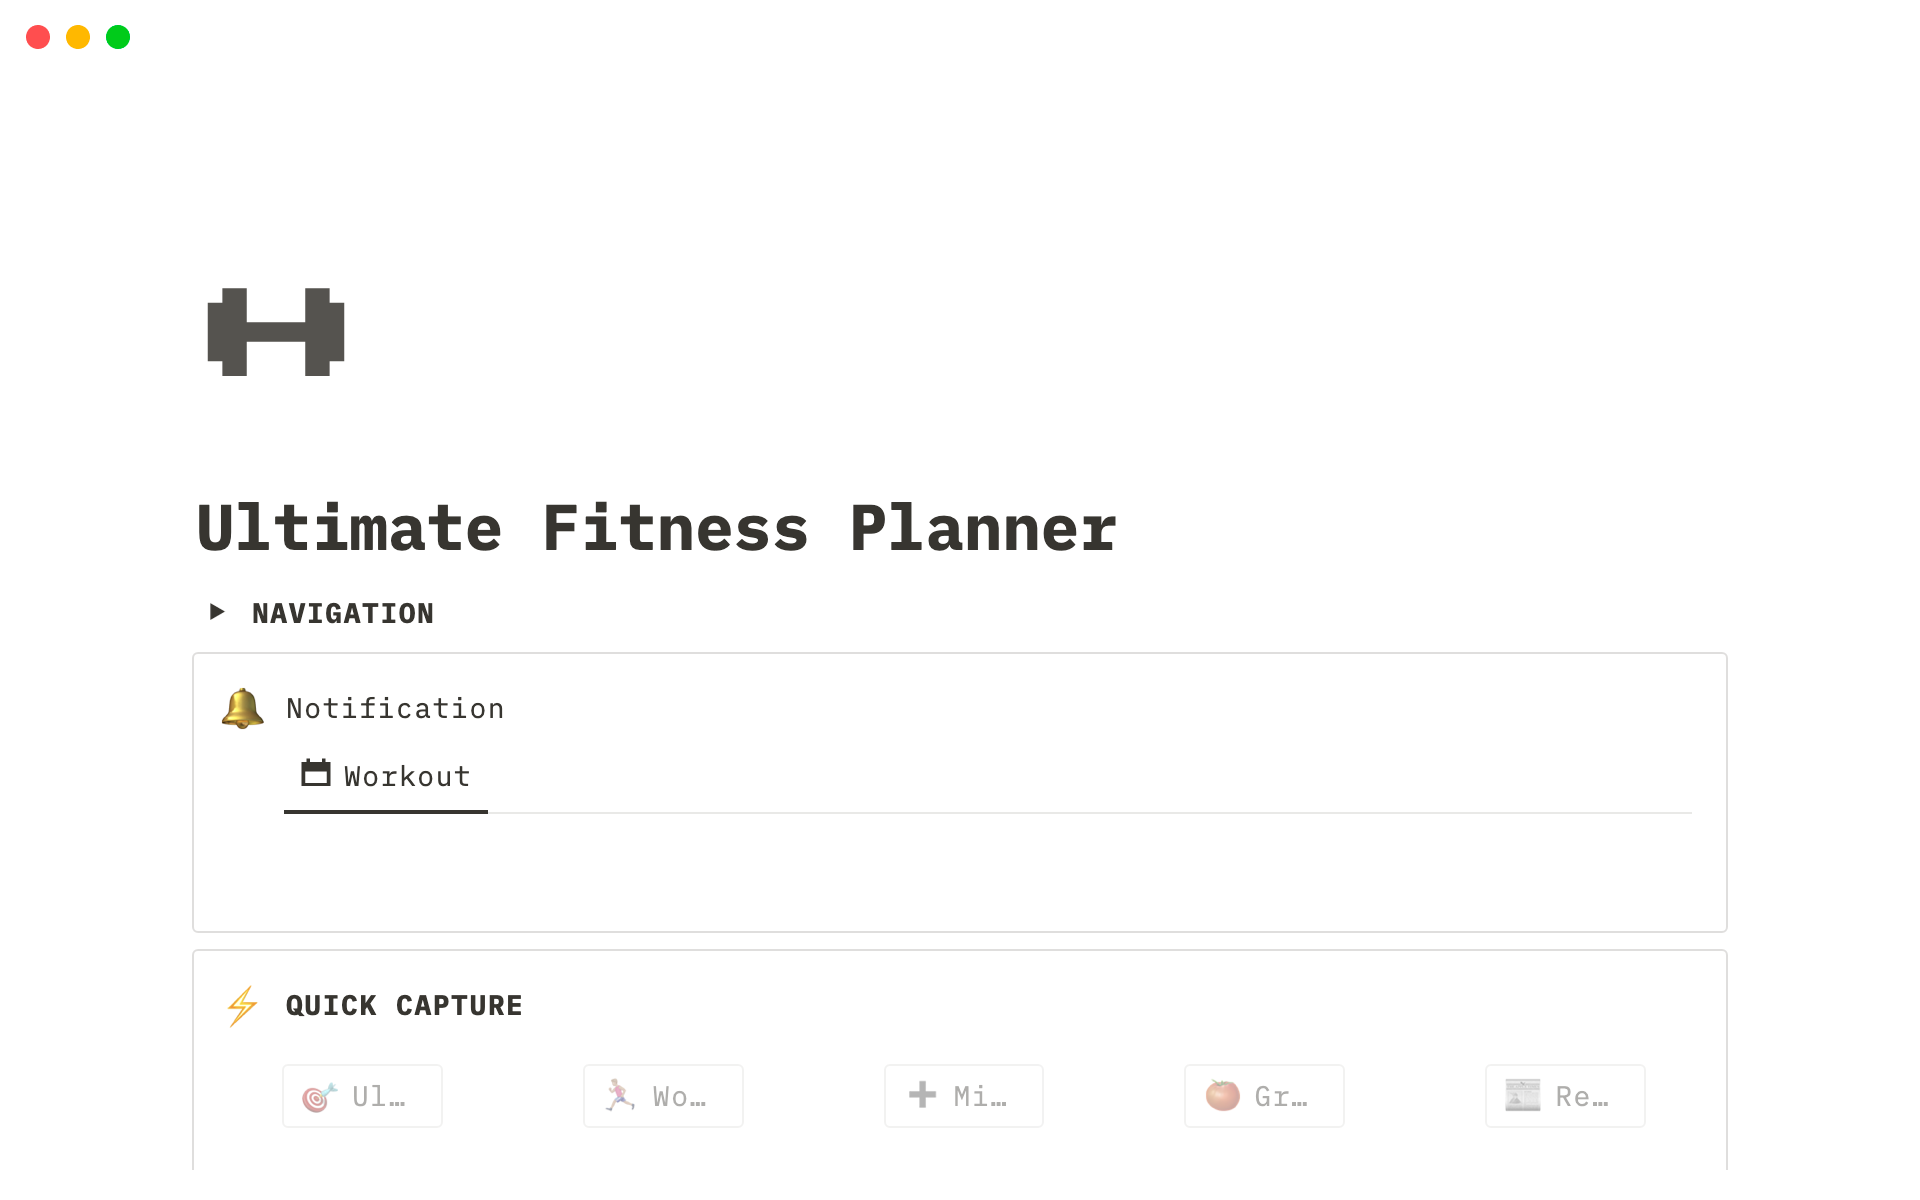 Helps individuals create fitness goals and plan their workouts.